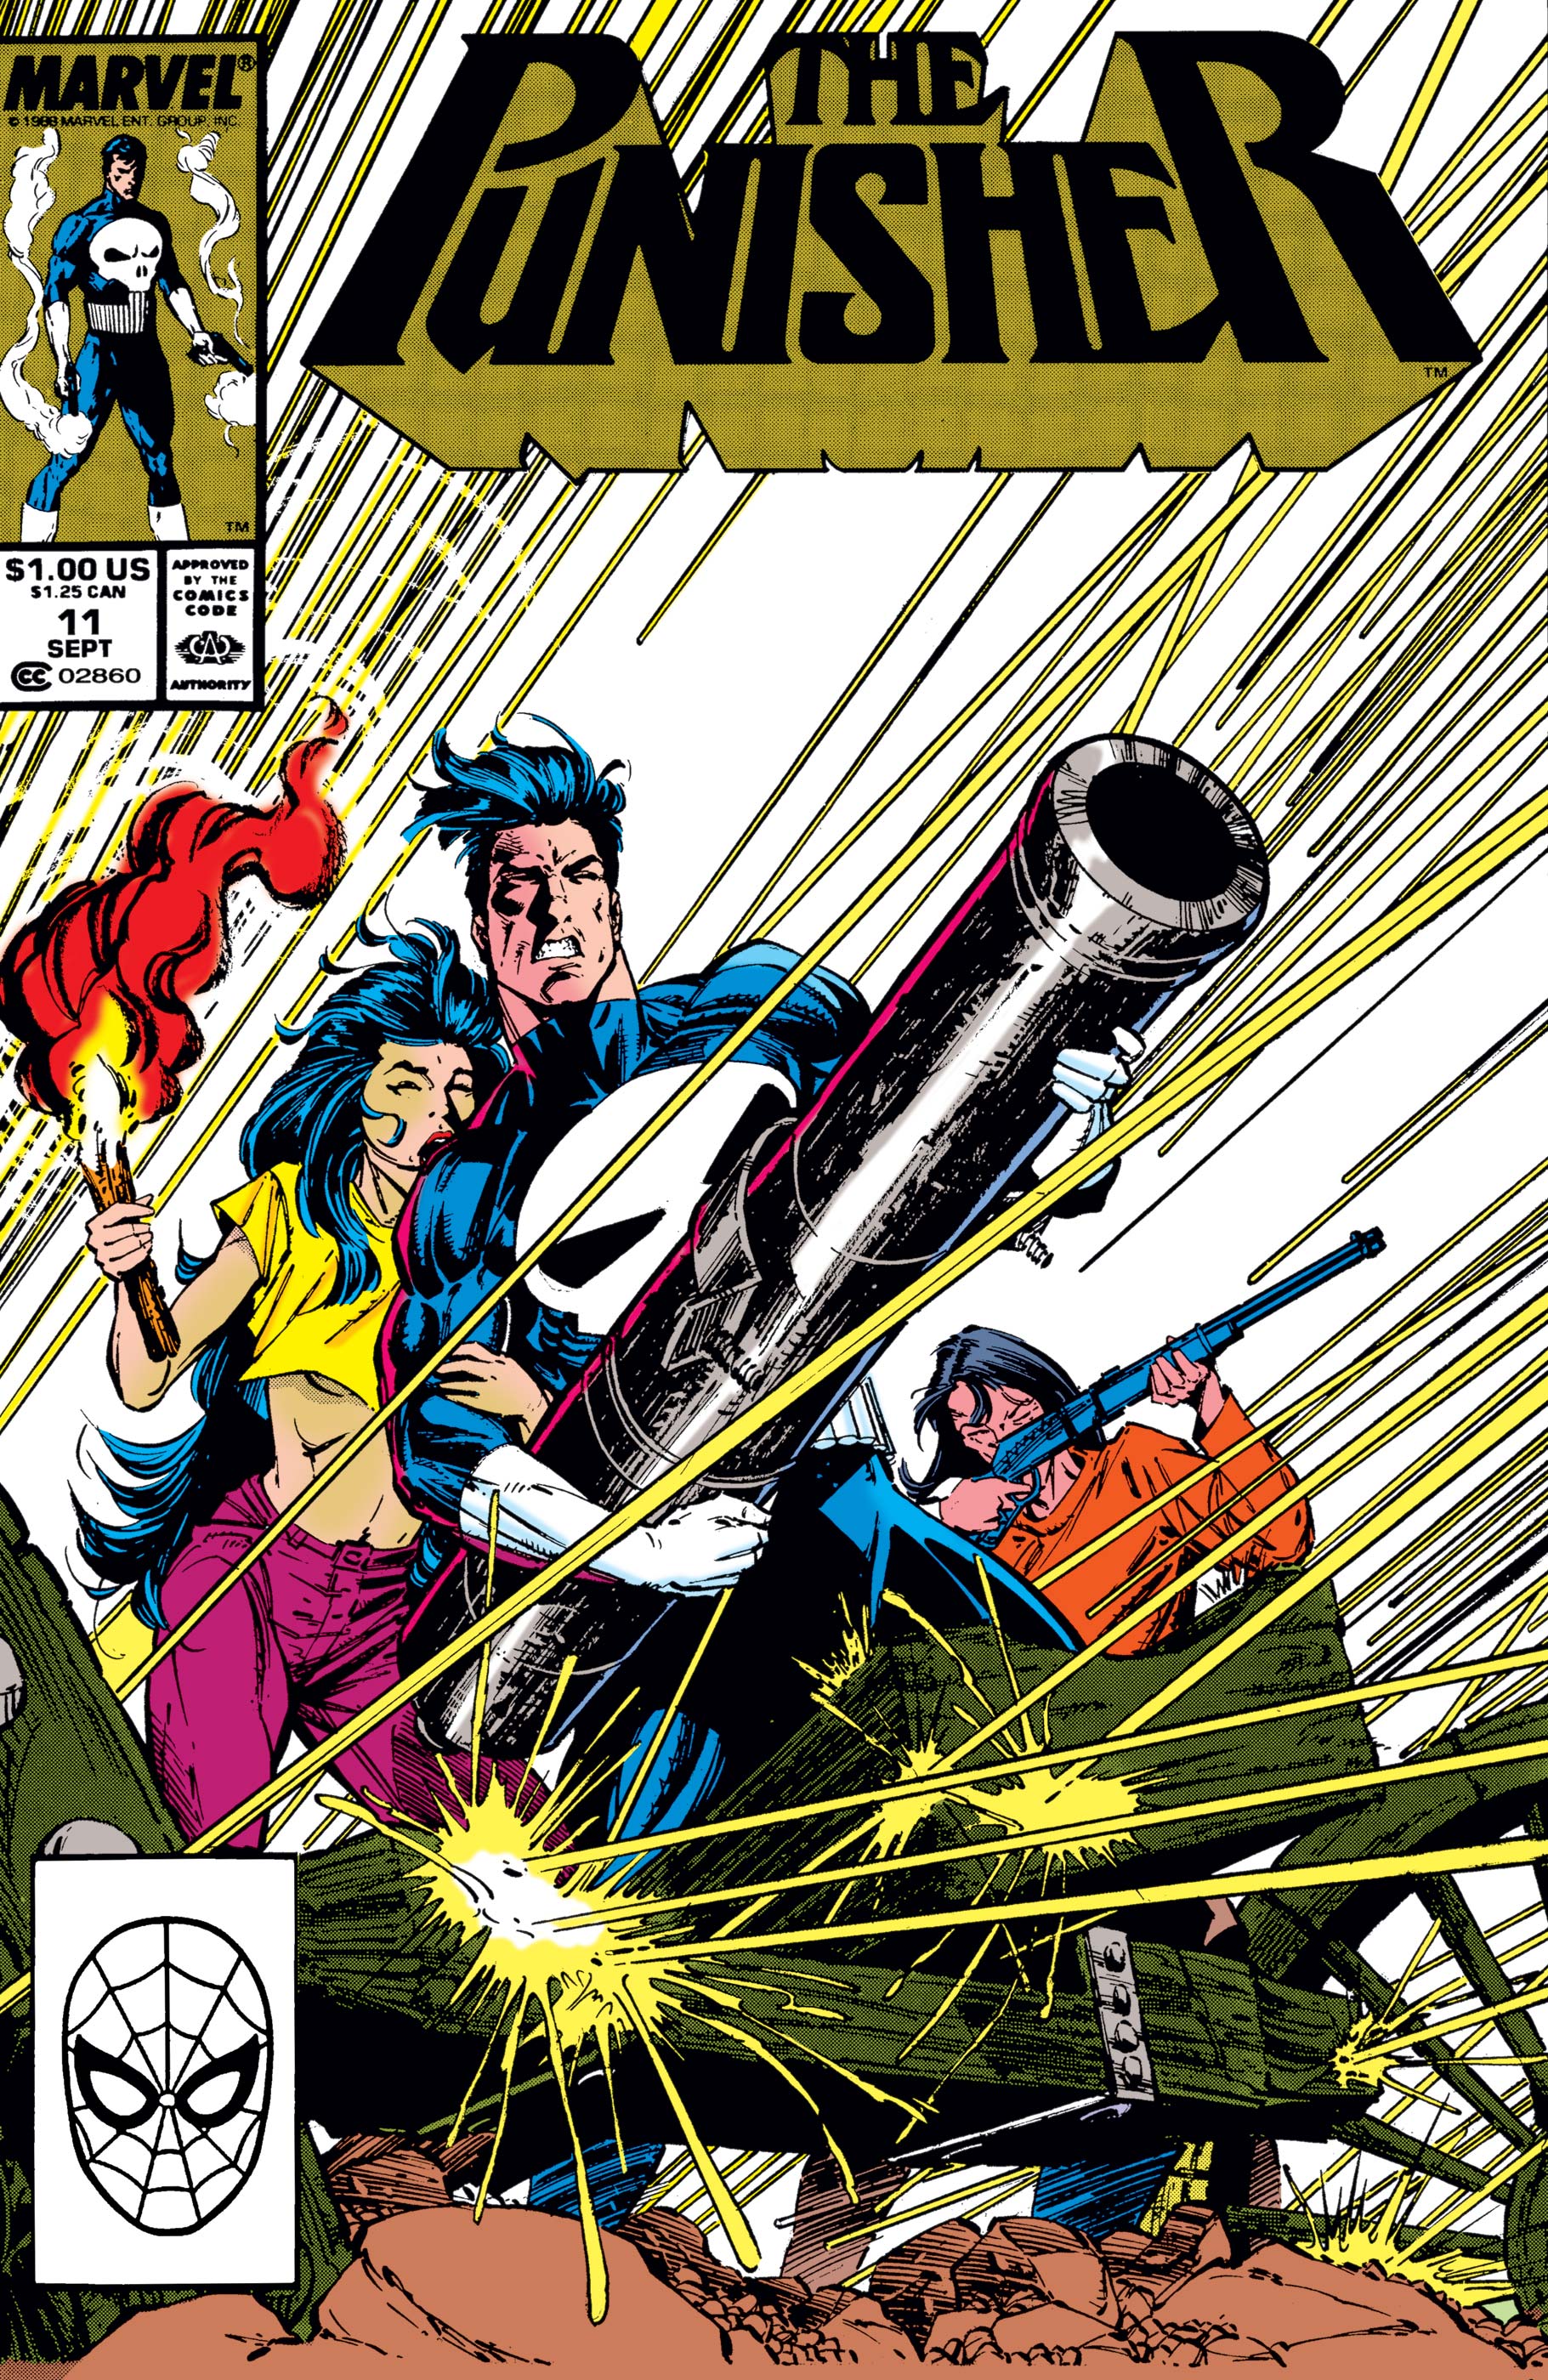 The Punisher (1987) #11